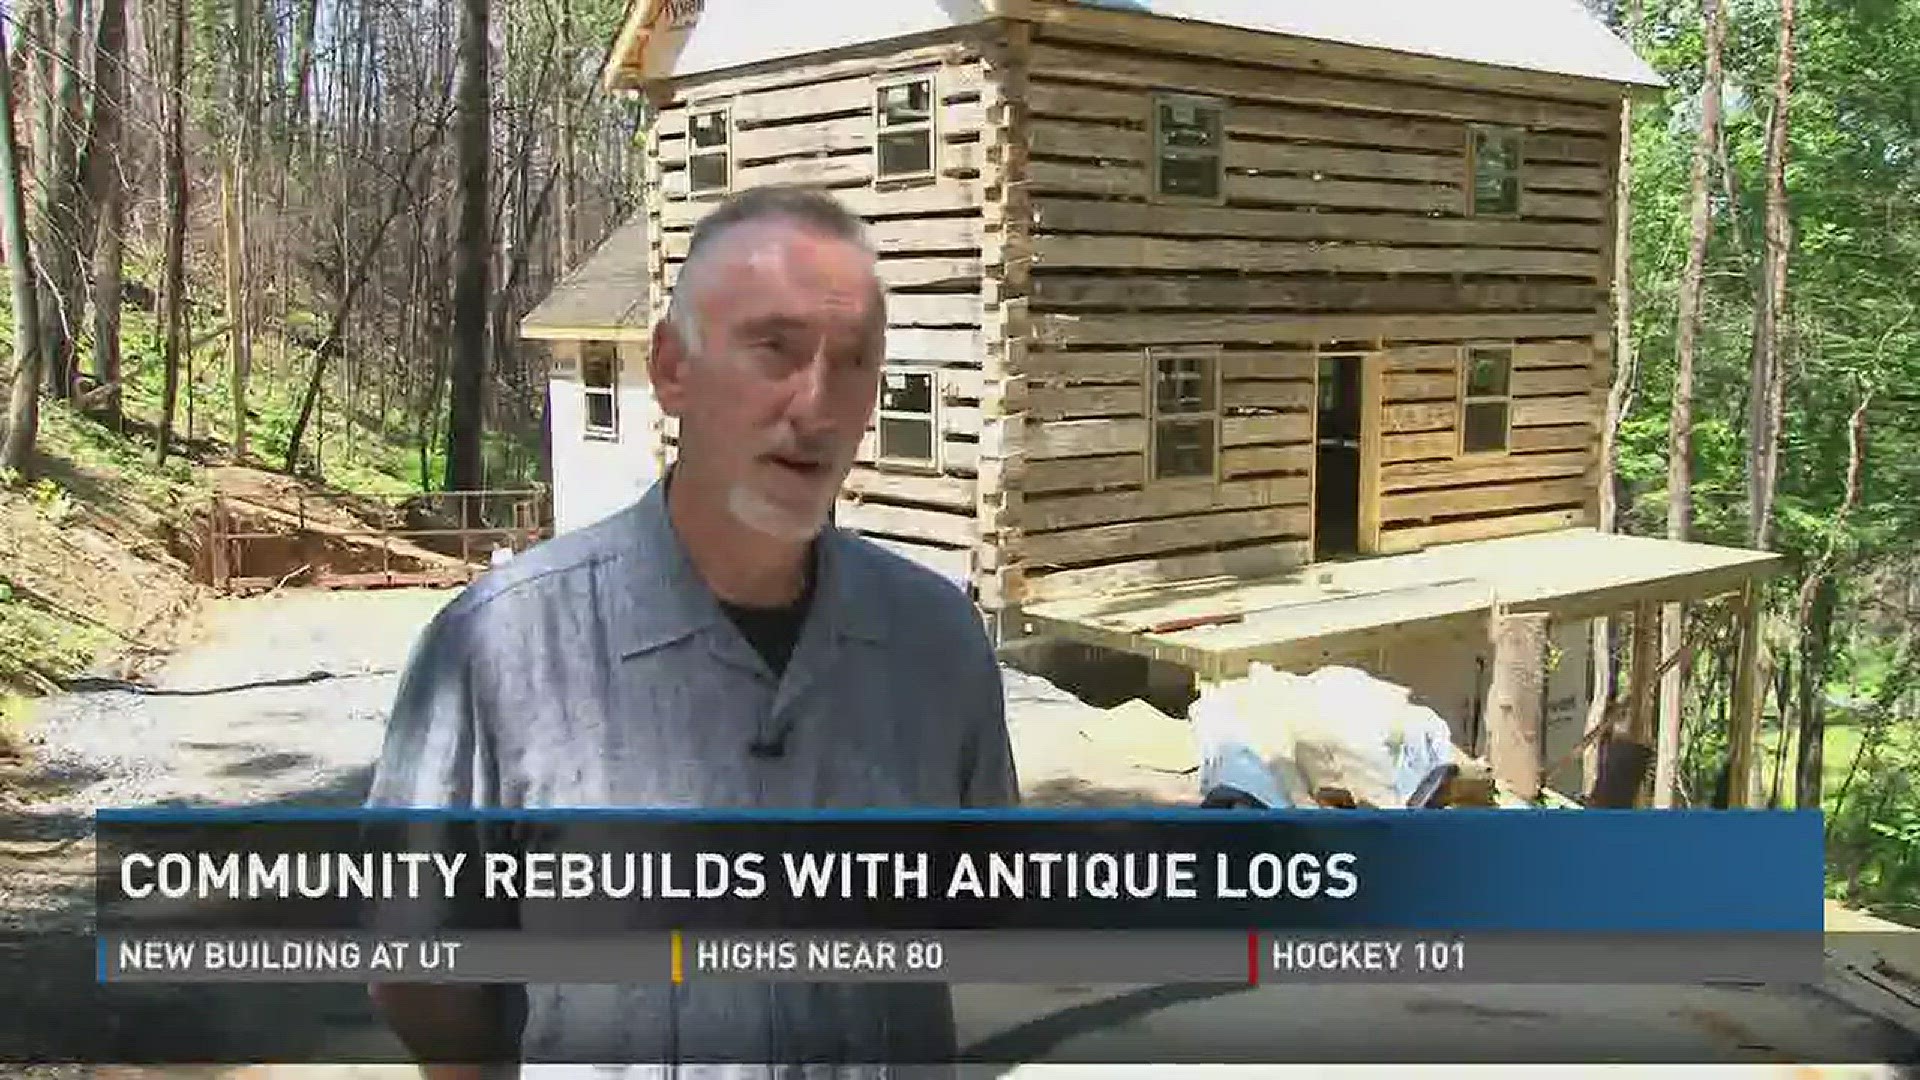 Only 8 out of 38 homes in the Timberidge Community survived the Sevier County fires. The community is working to rebuild with authentic antique wood.